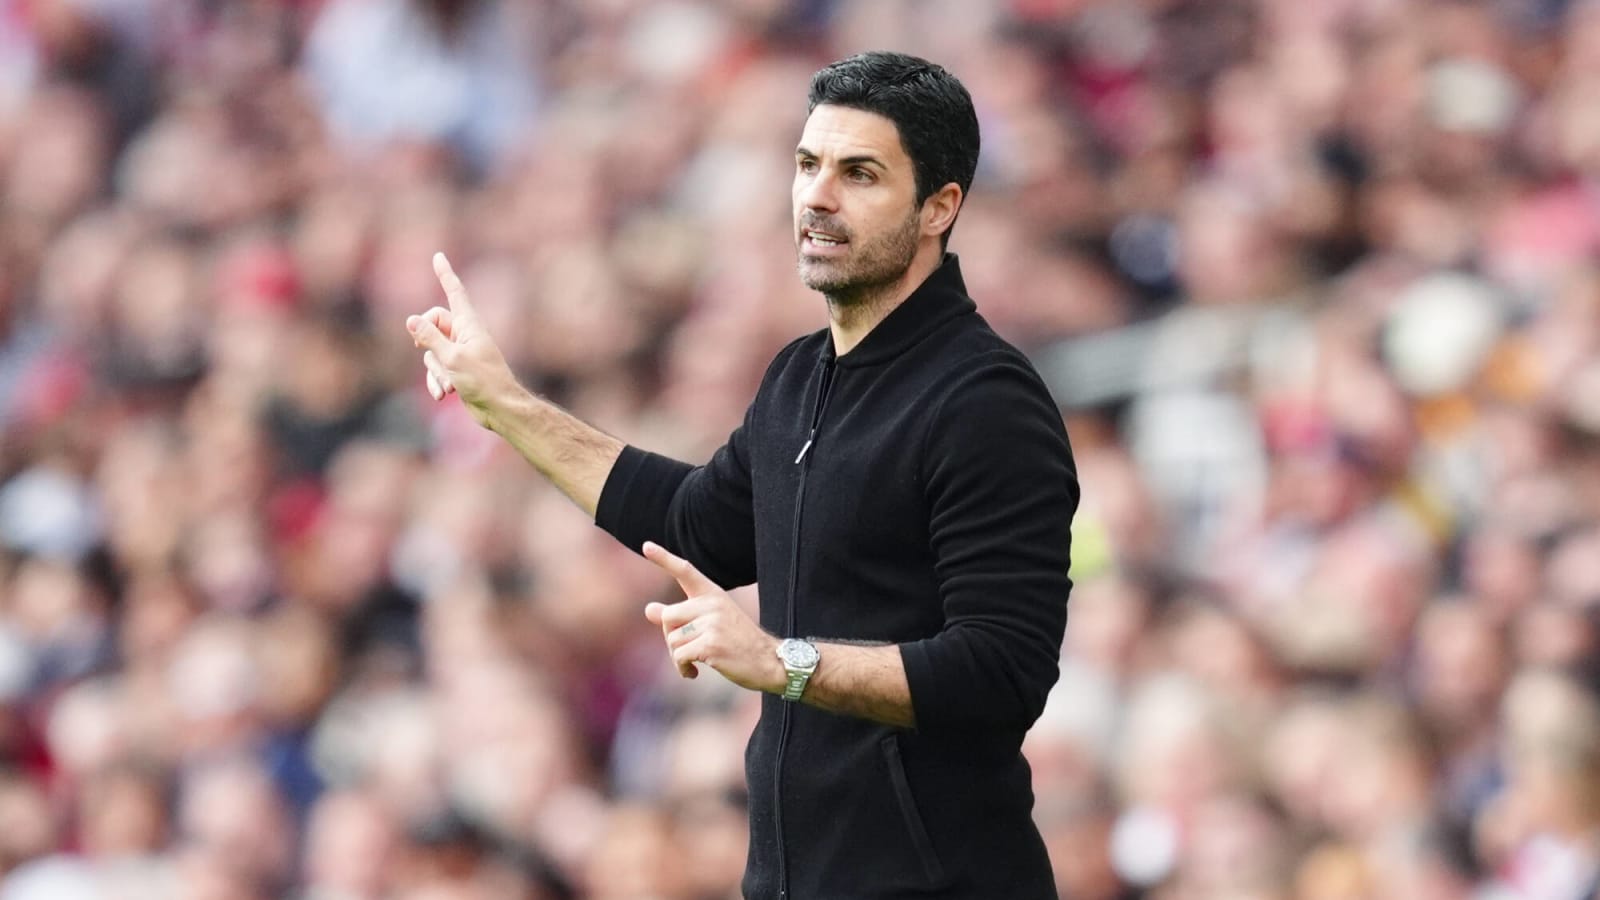 Mikel Arteta reveals how his family reacted to that Son miss